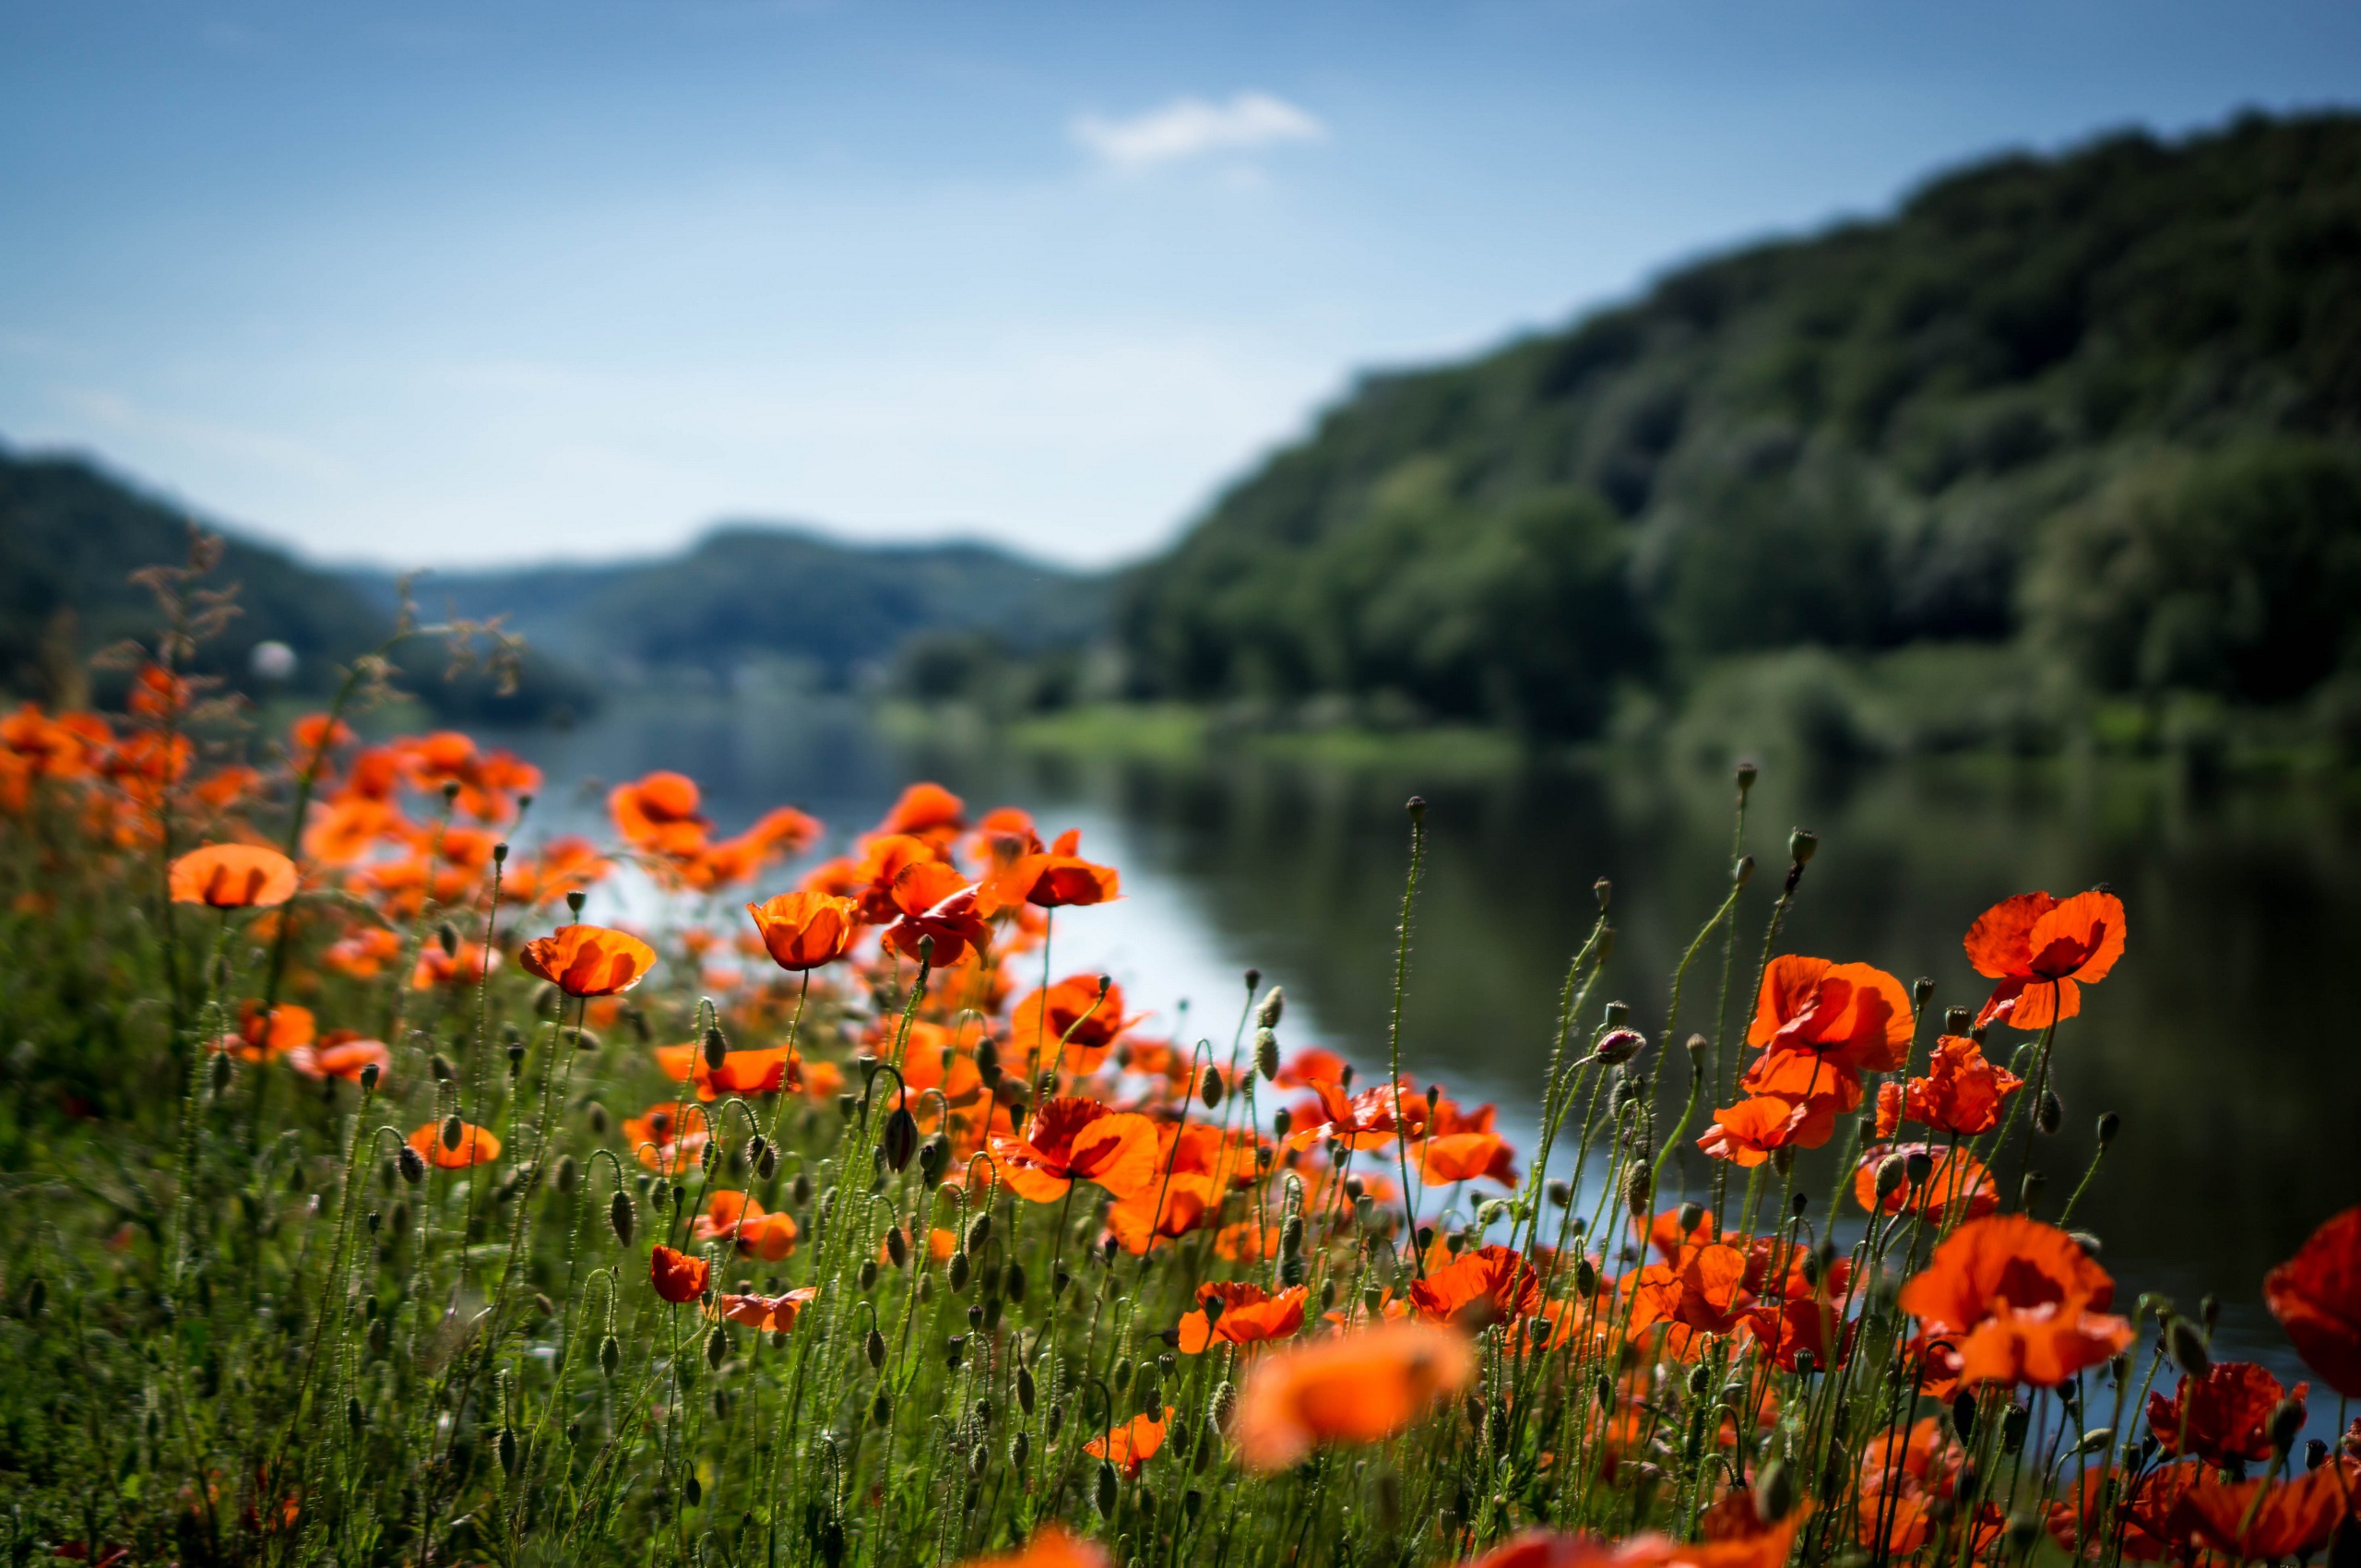 General 2560x1700 nature river flowers red flowers plants poppies